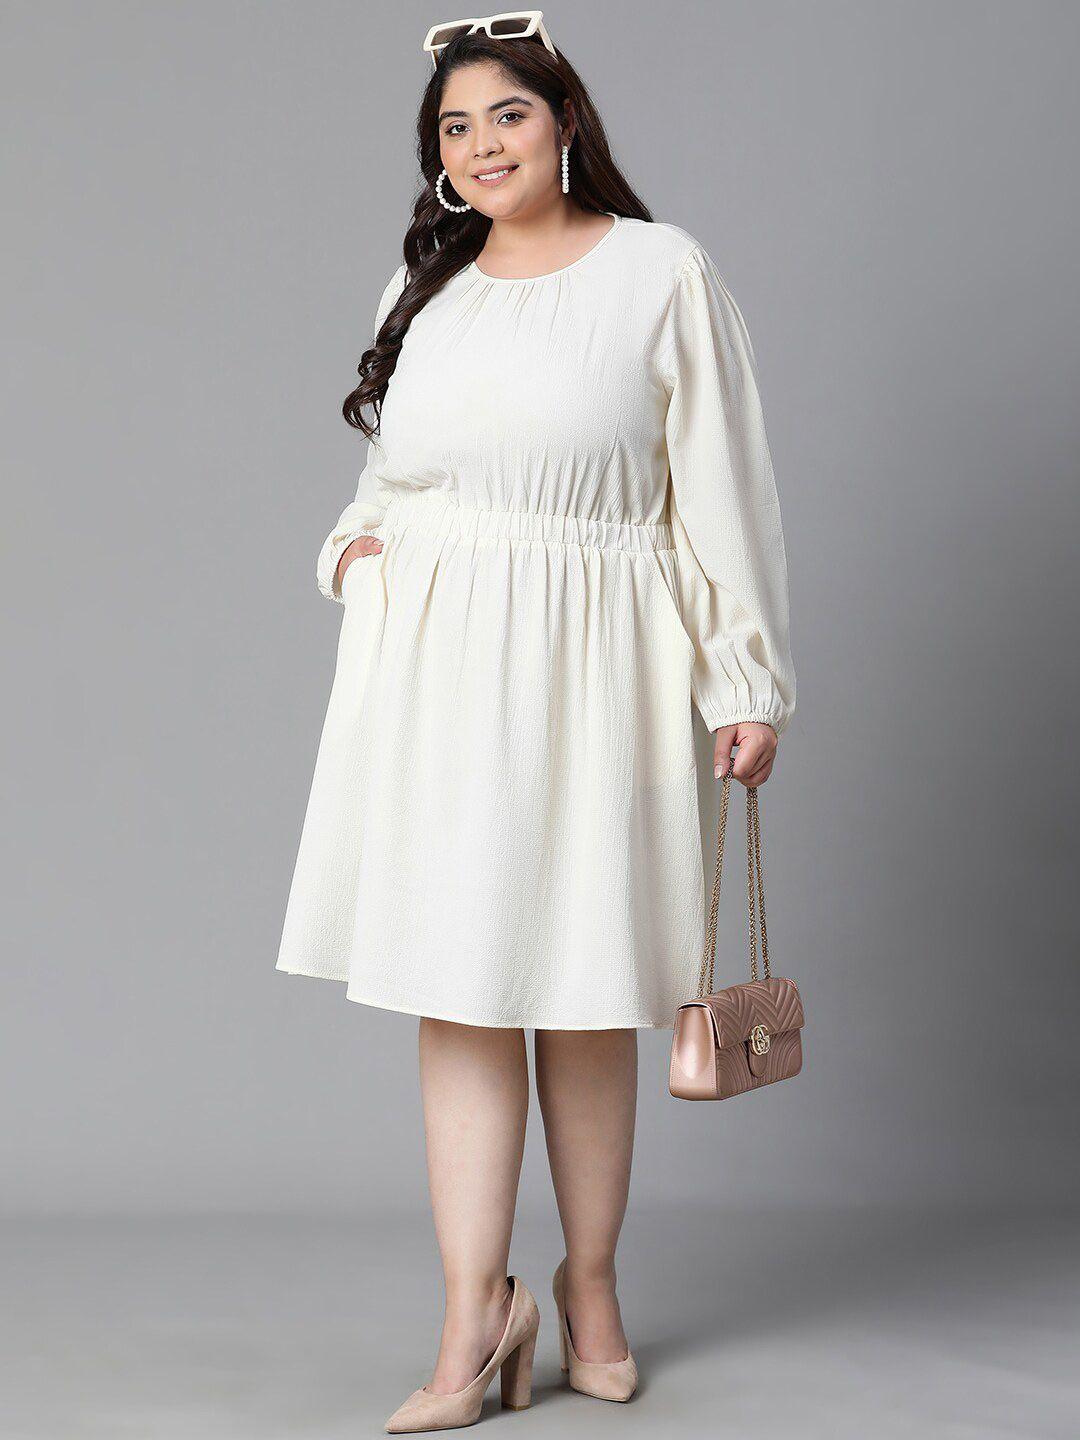 oxolloxo plus size round neck fit & flare dress